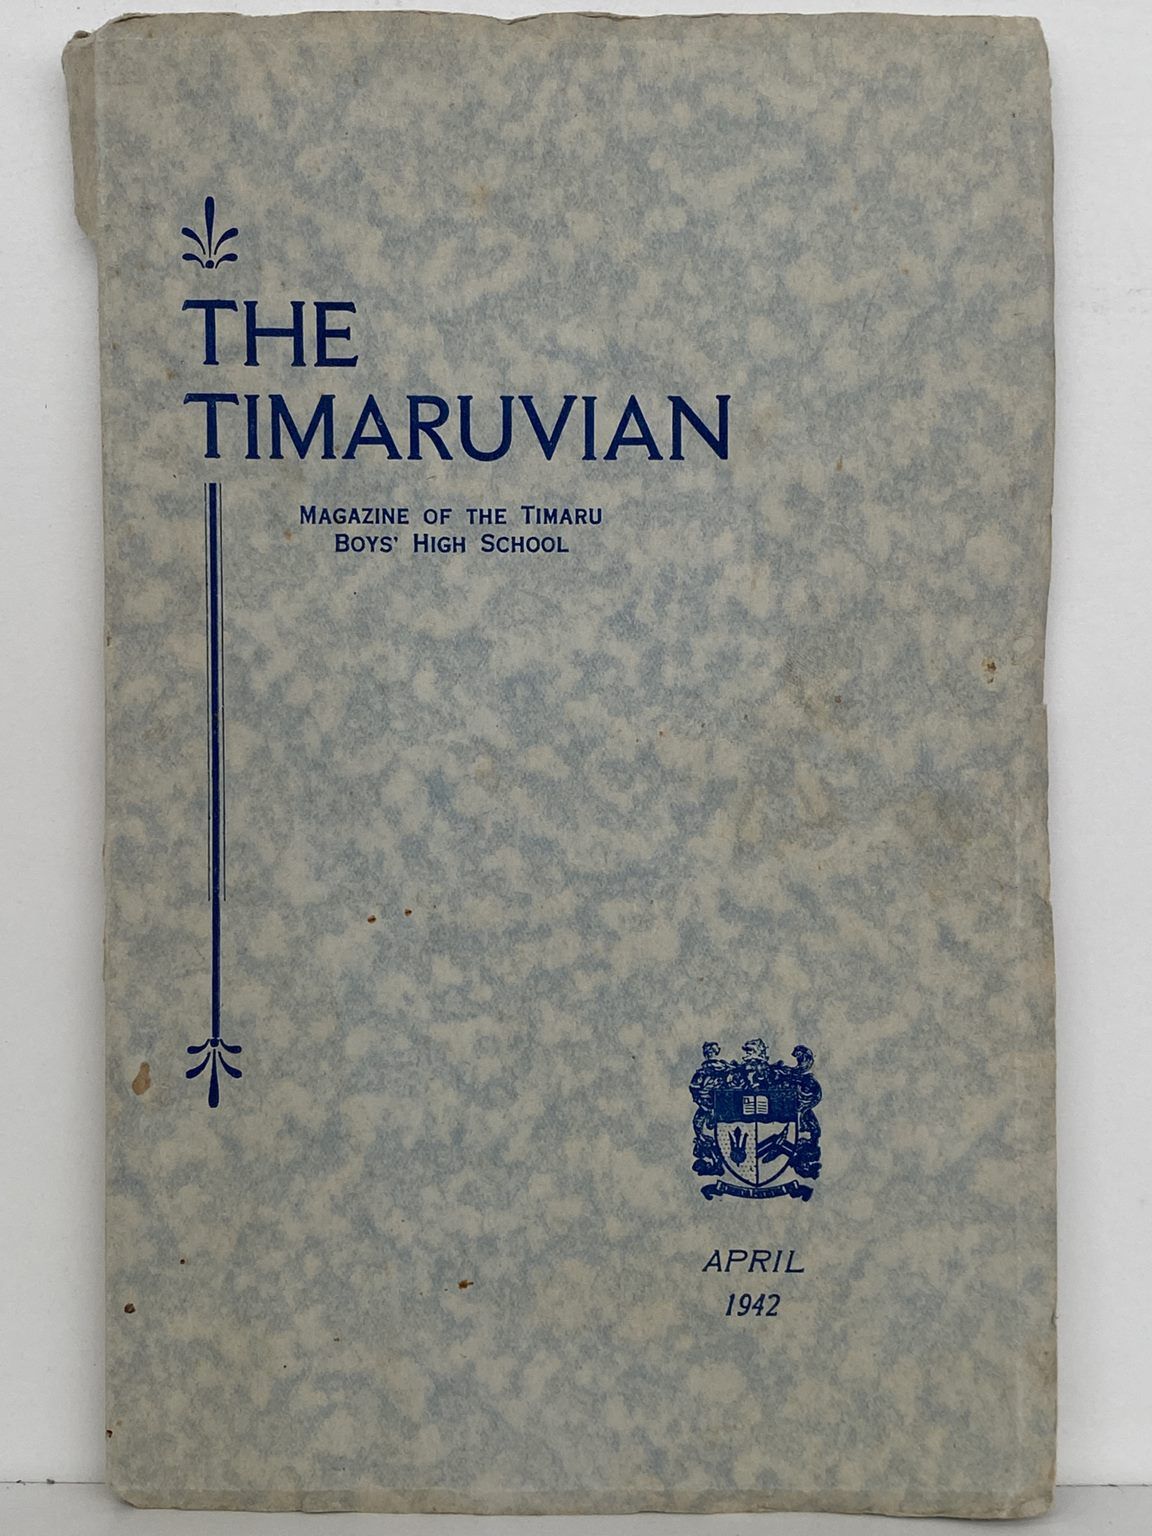 THE TIMARUVIAN: Magazine of the Timaru Boys' High School and its Old Boys' Association 1942